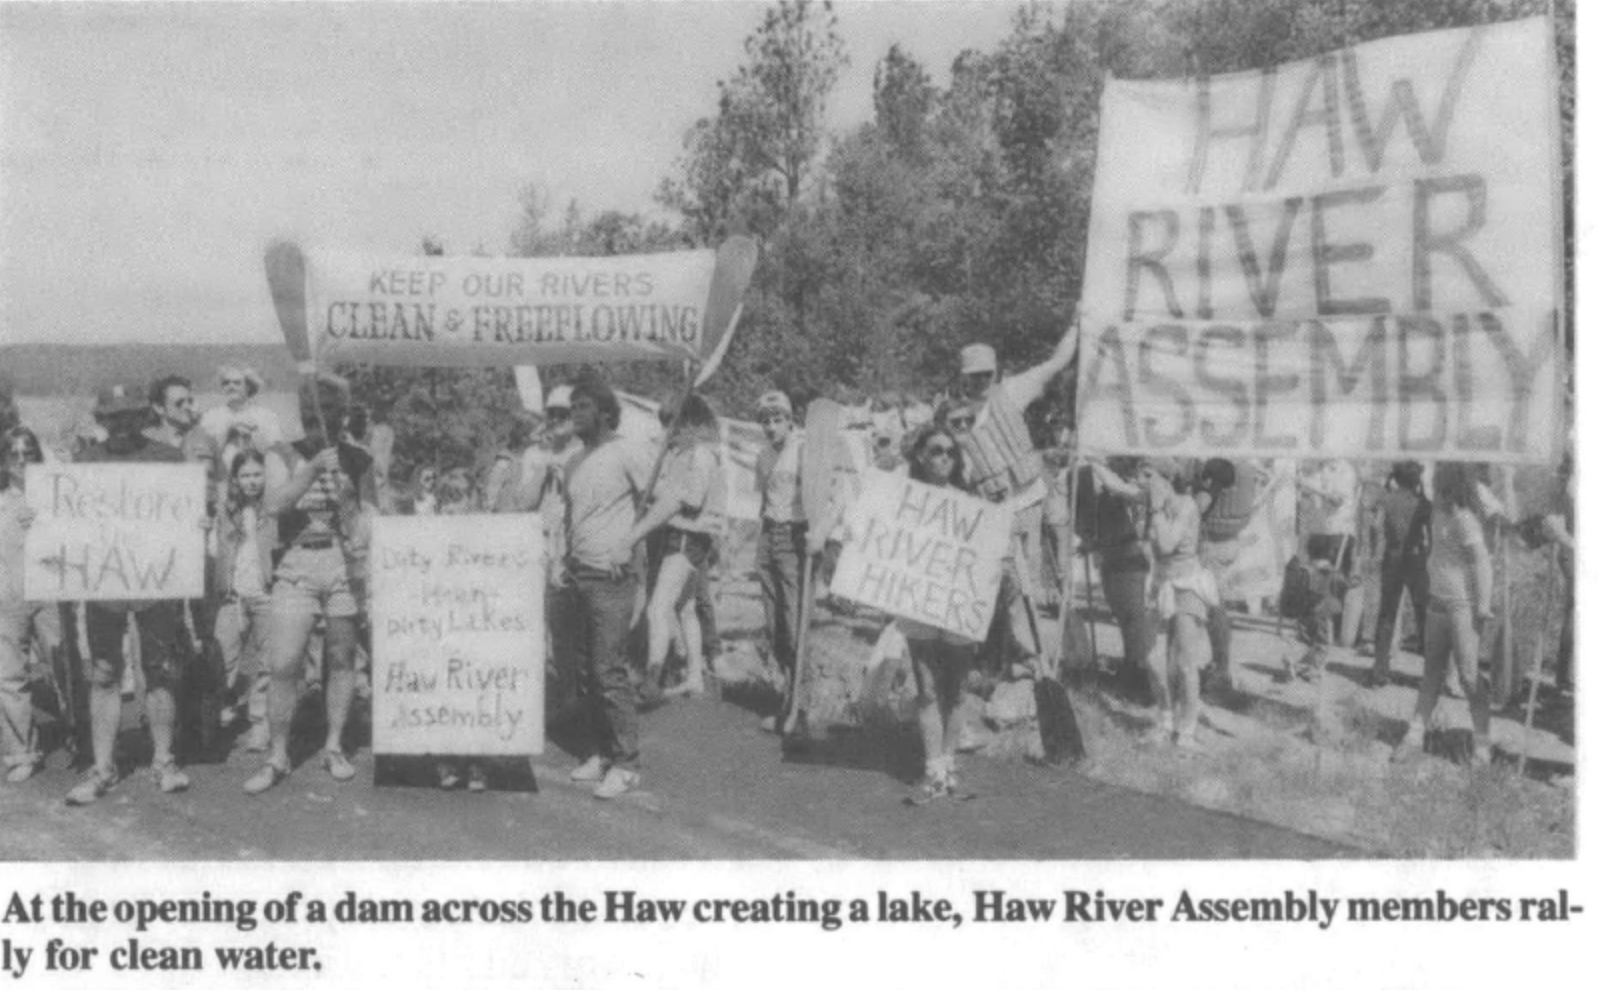 Haw River Assembly members assembly for clean water